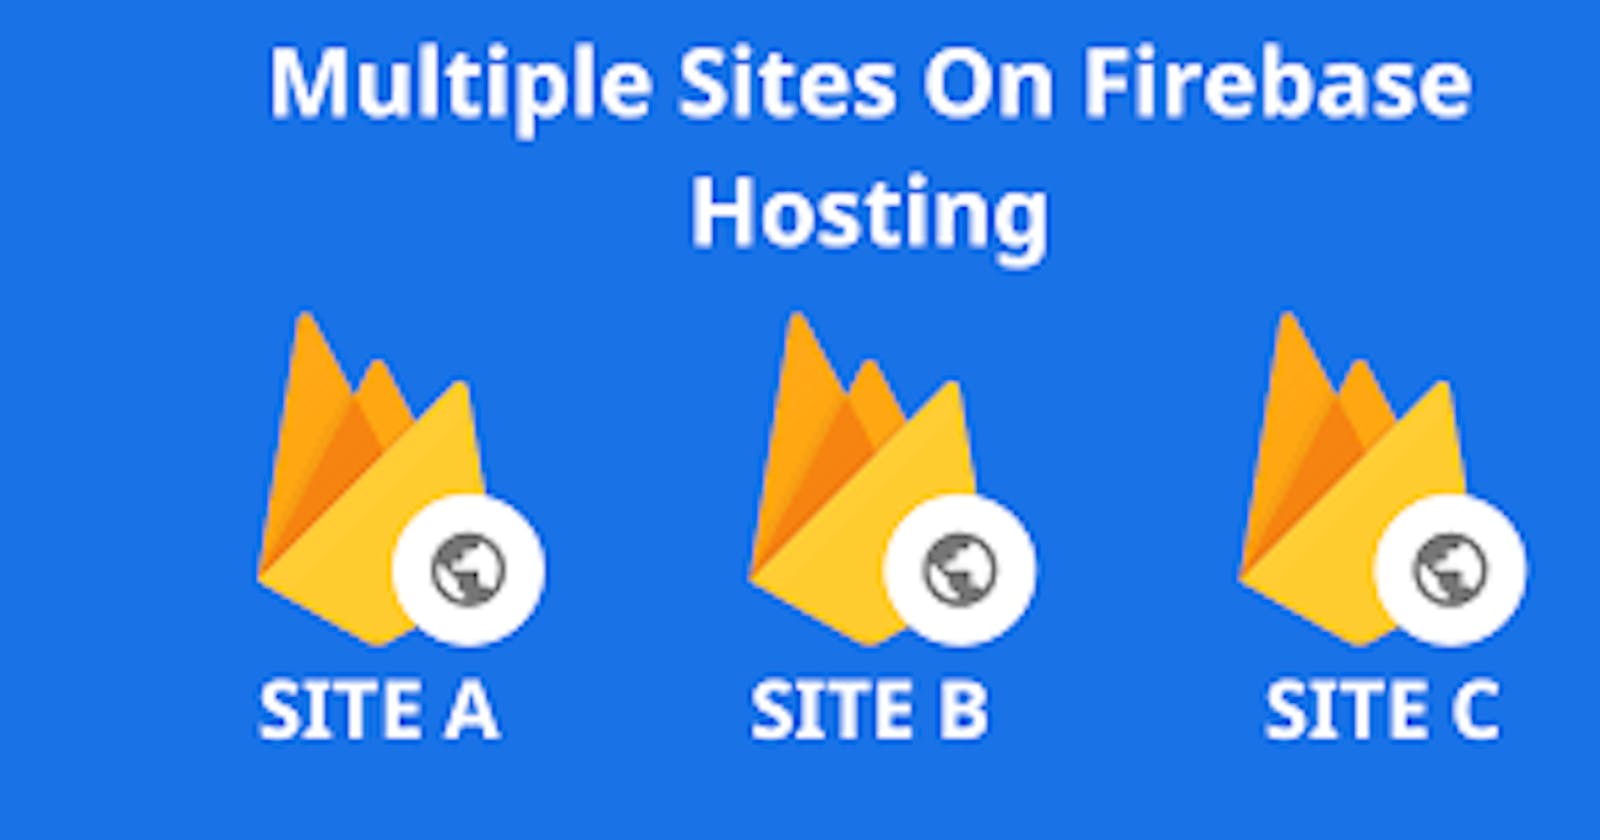 How to deploy multiple sites to firebase hosting?